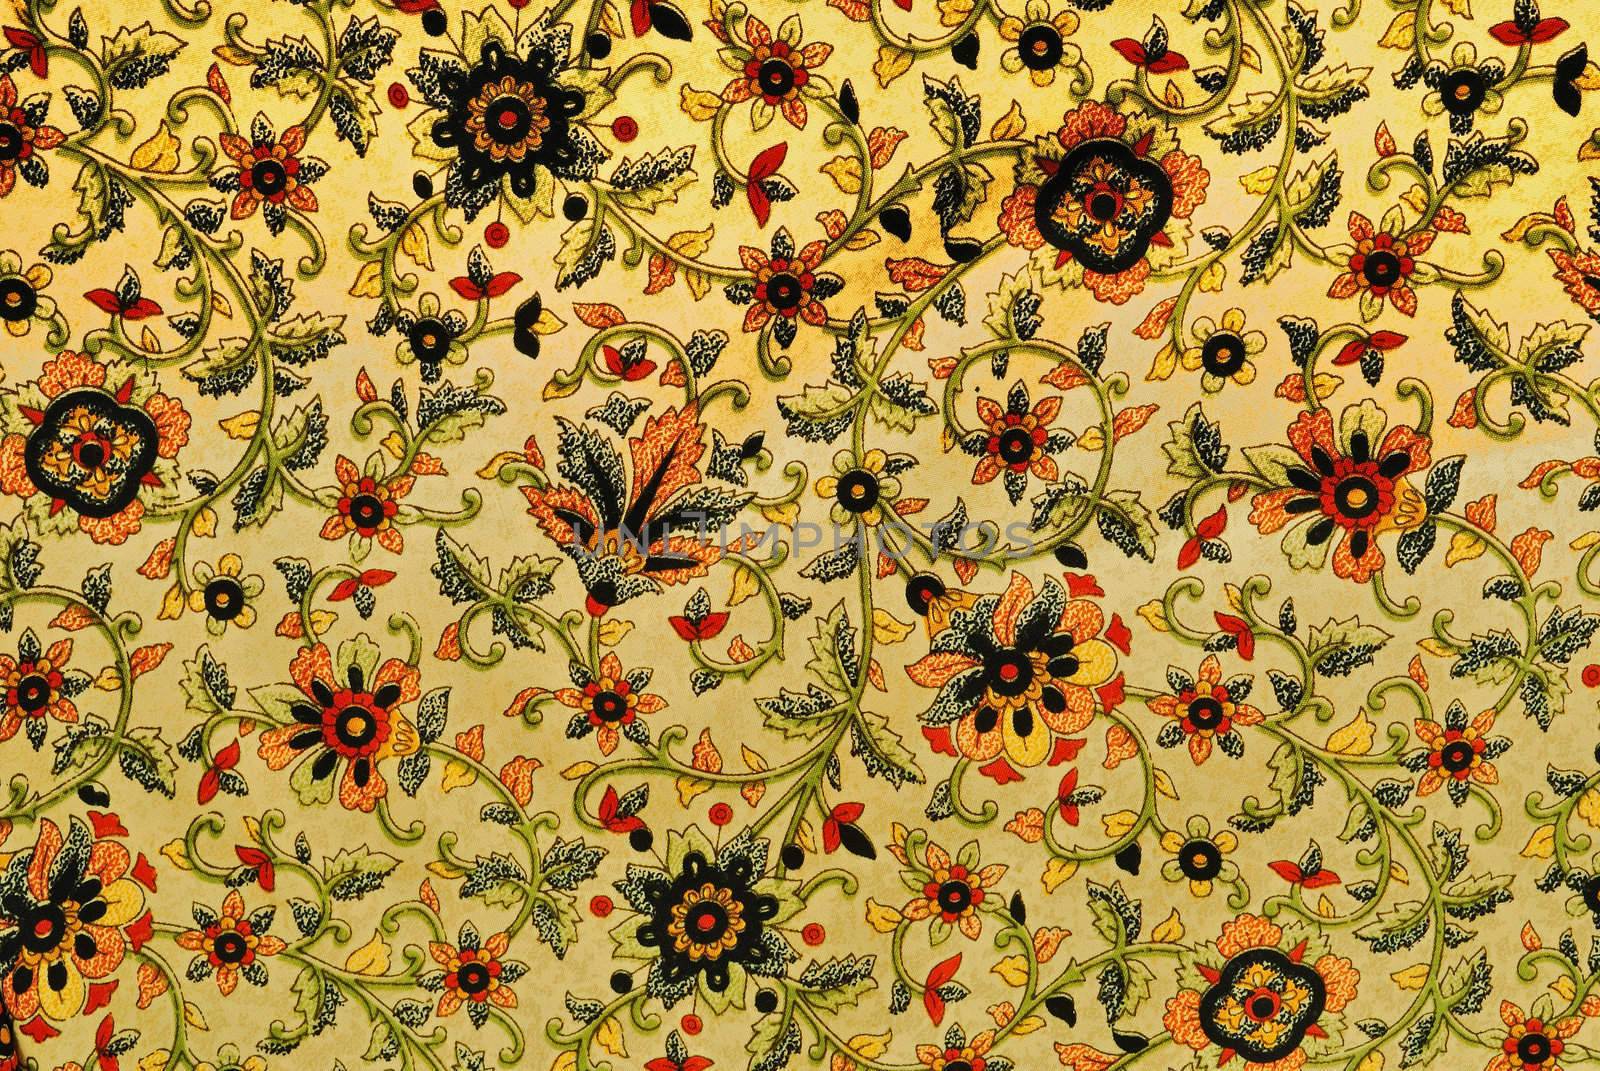 vegetable decorative pattern in Indian style on fabric